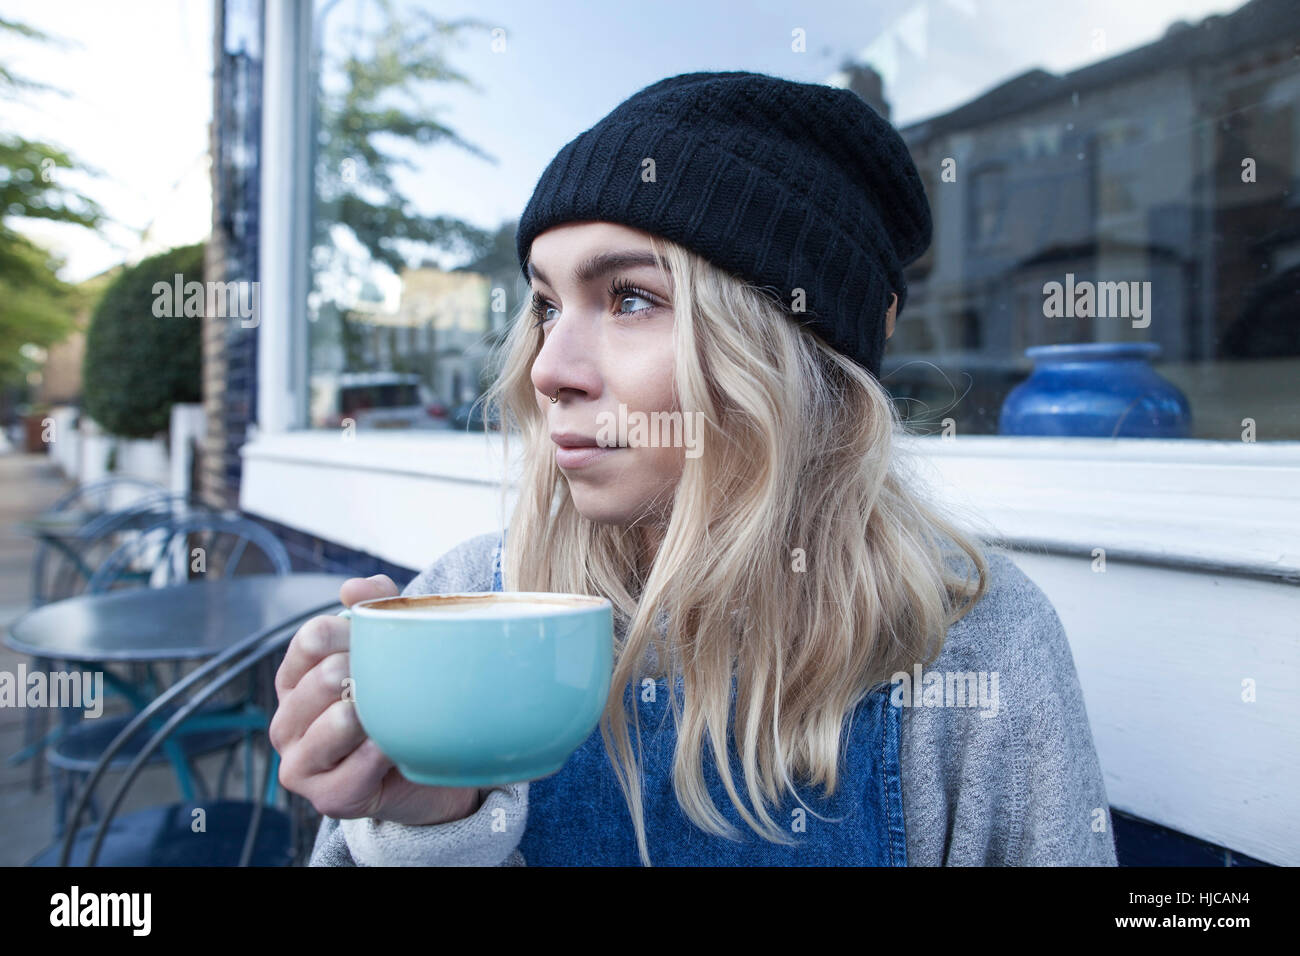 Young woman sitting outside cafe, drinking cup of tea Stock Photo